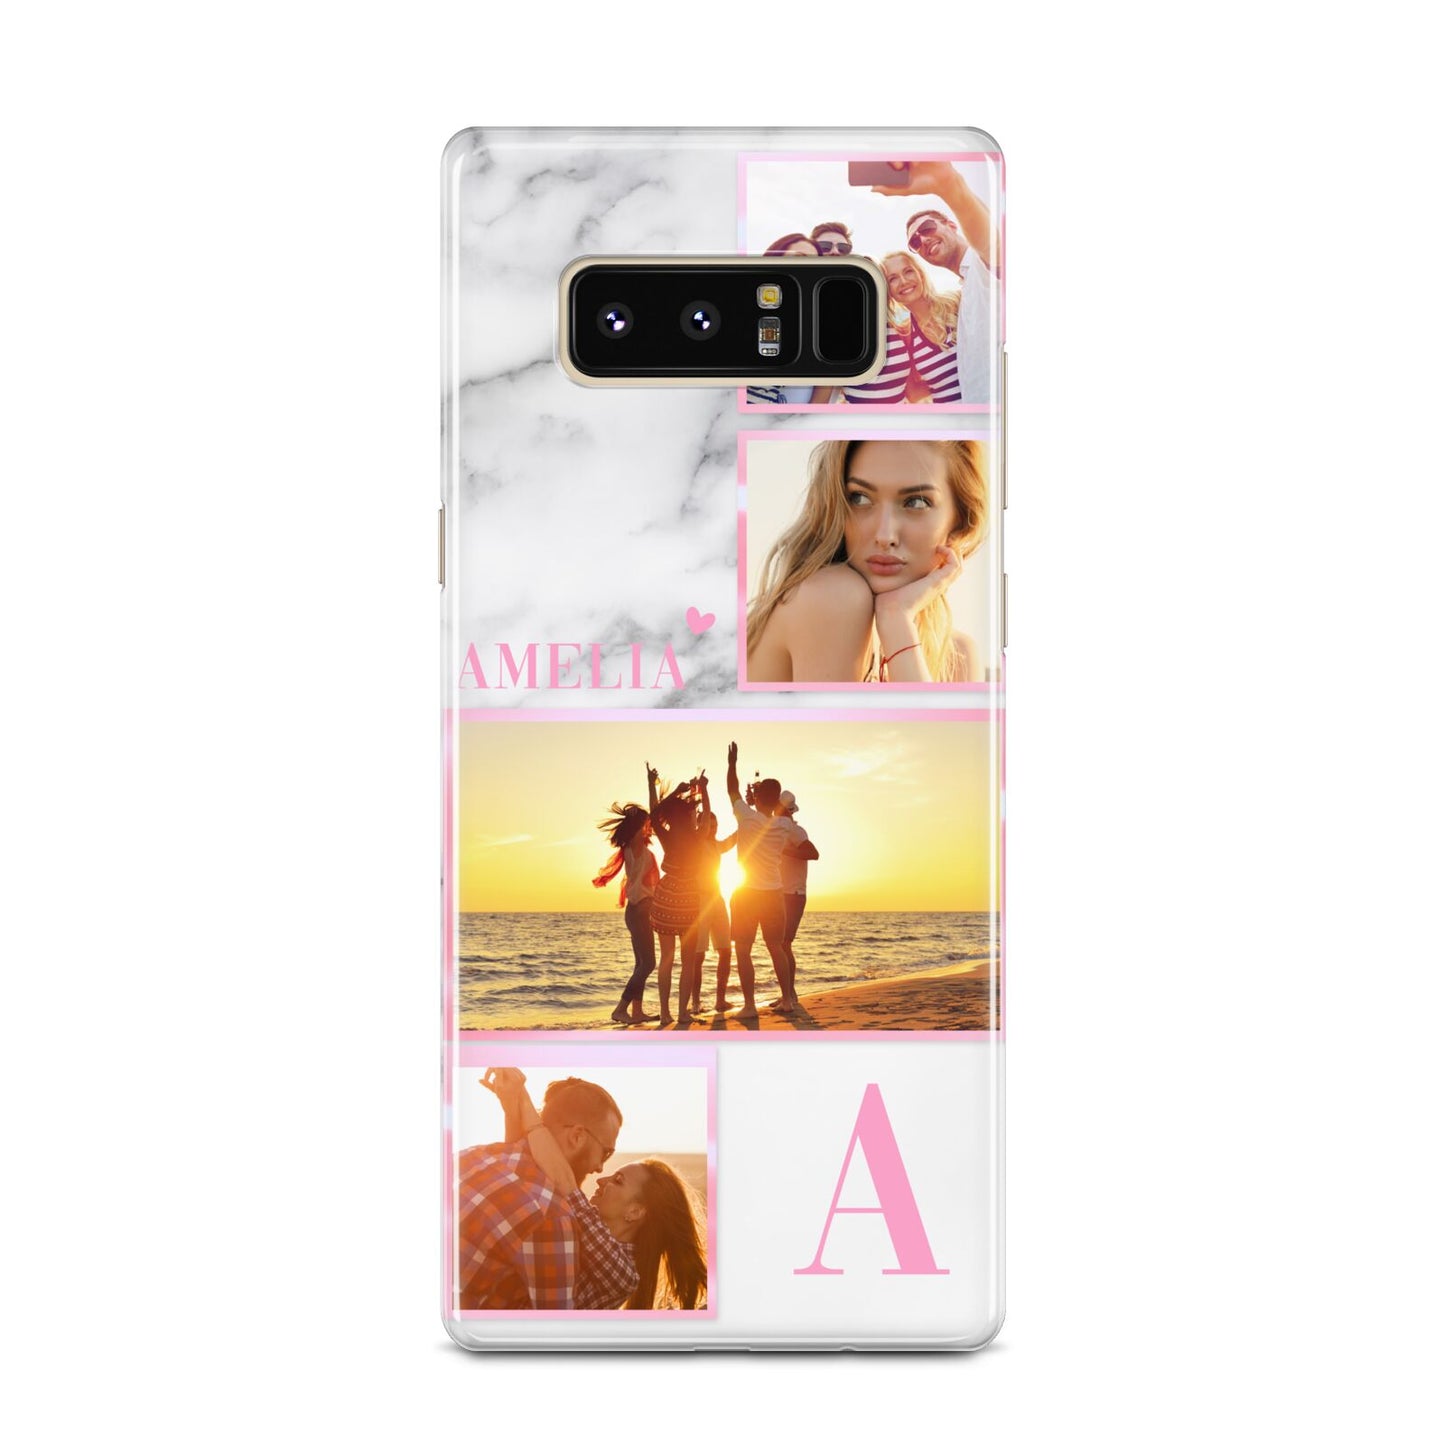 Personalised Marble Photo Collage Samsung Galaxy Note 8 Case